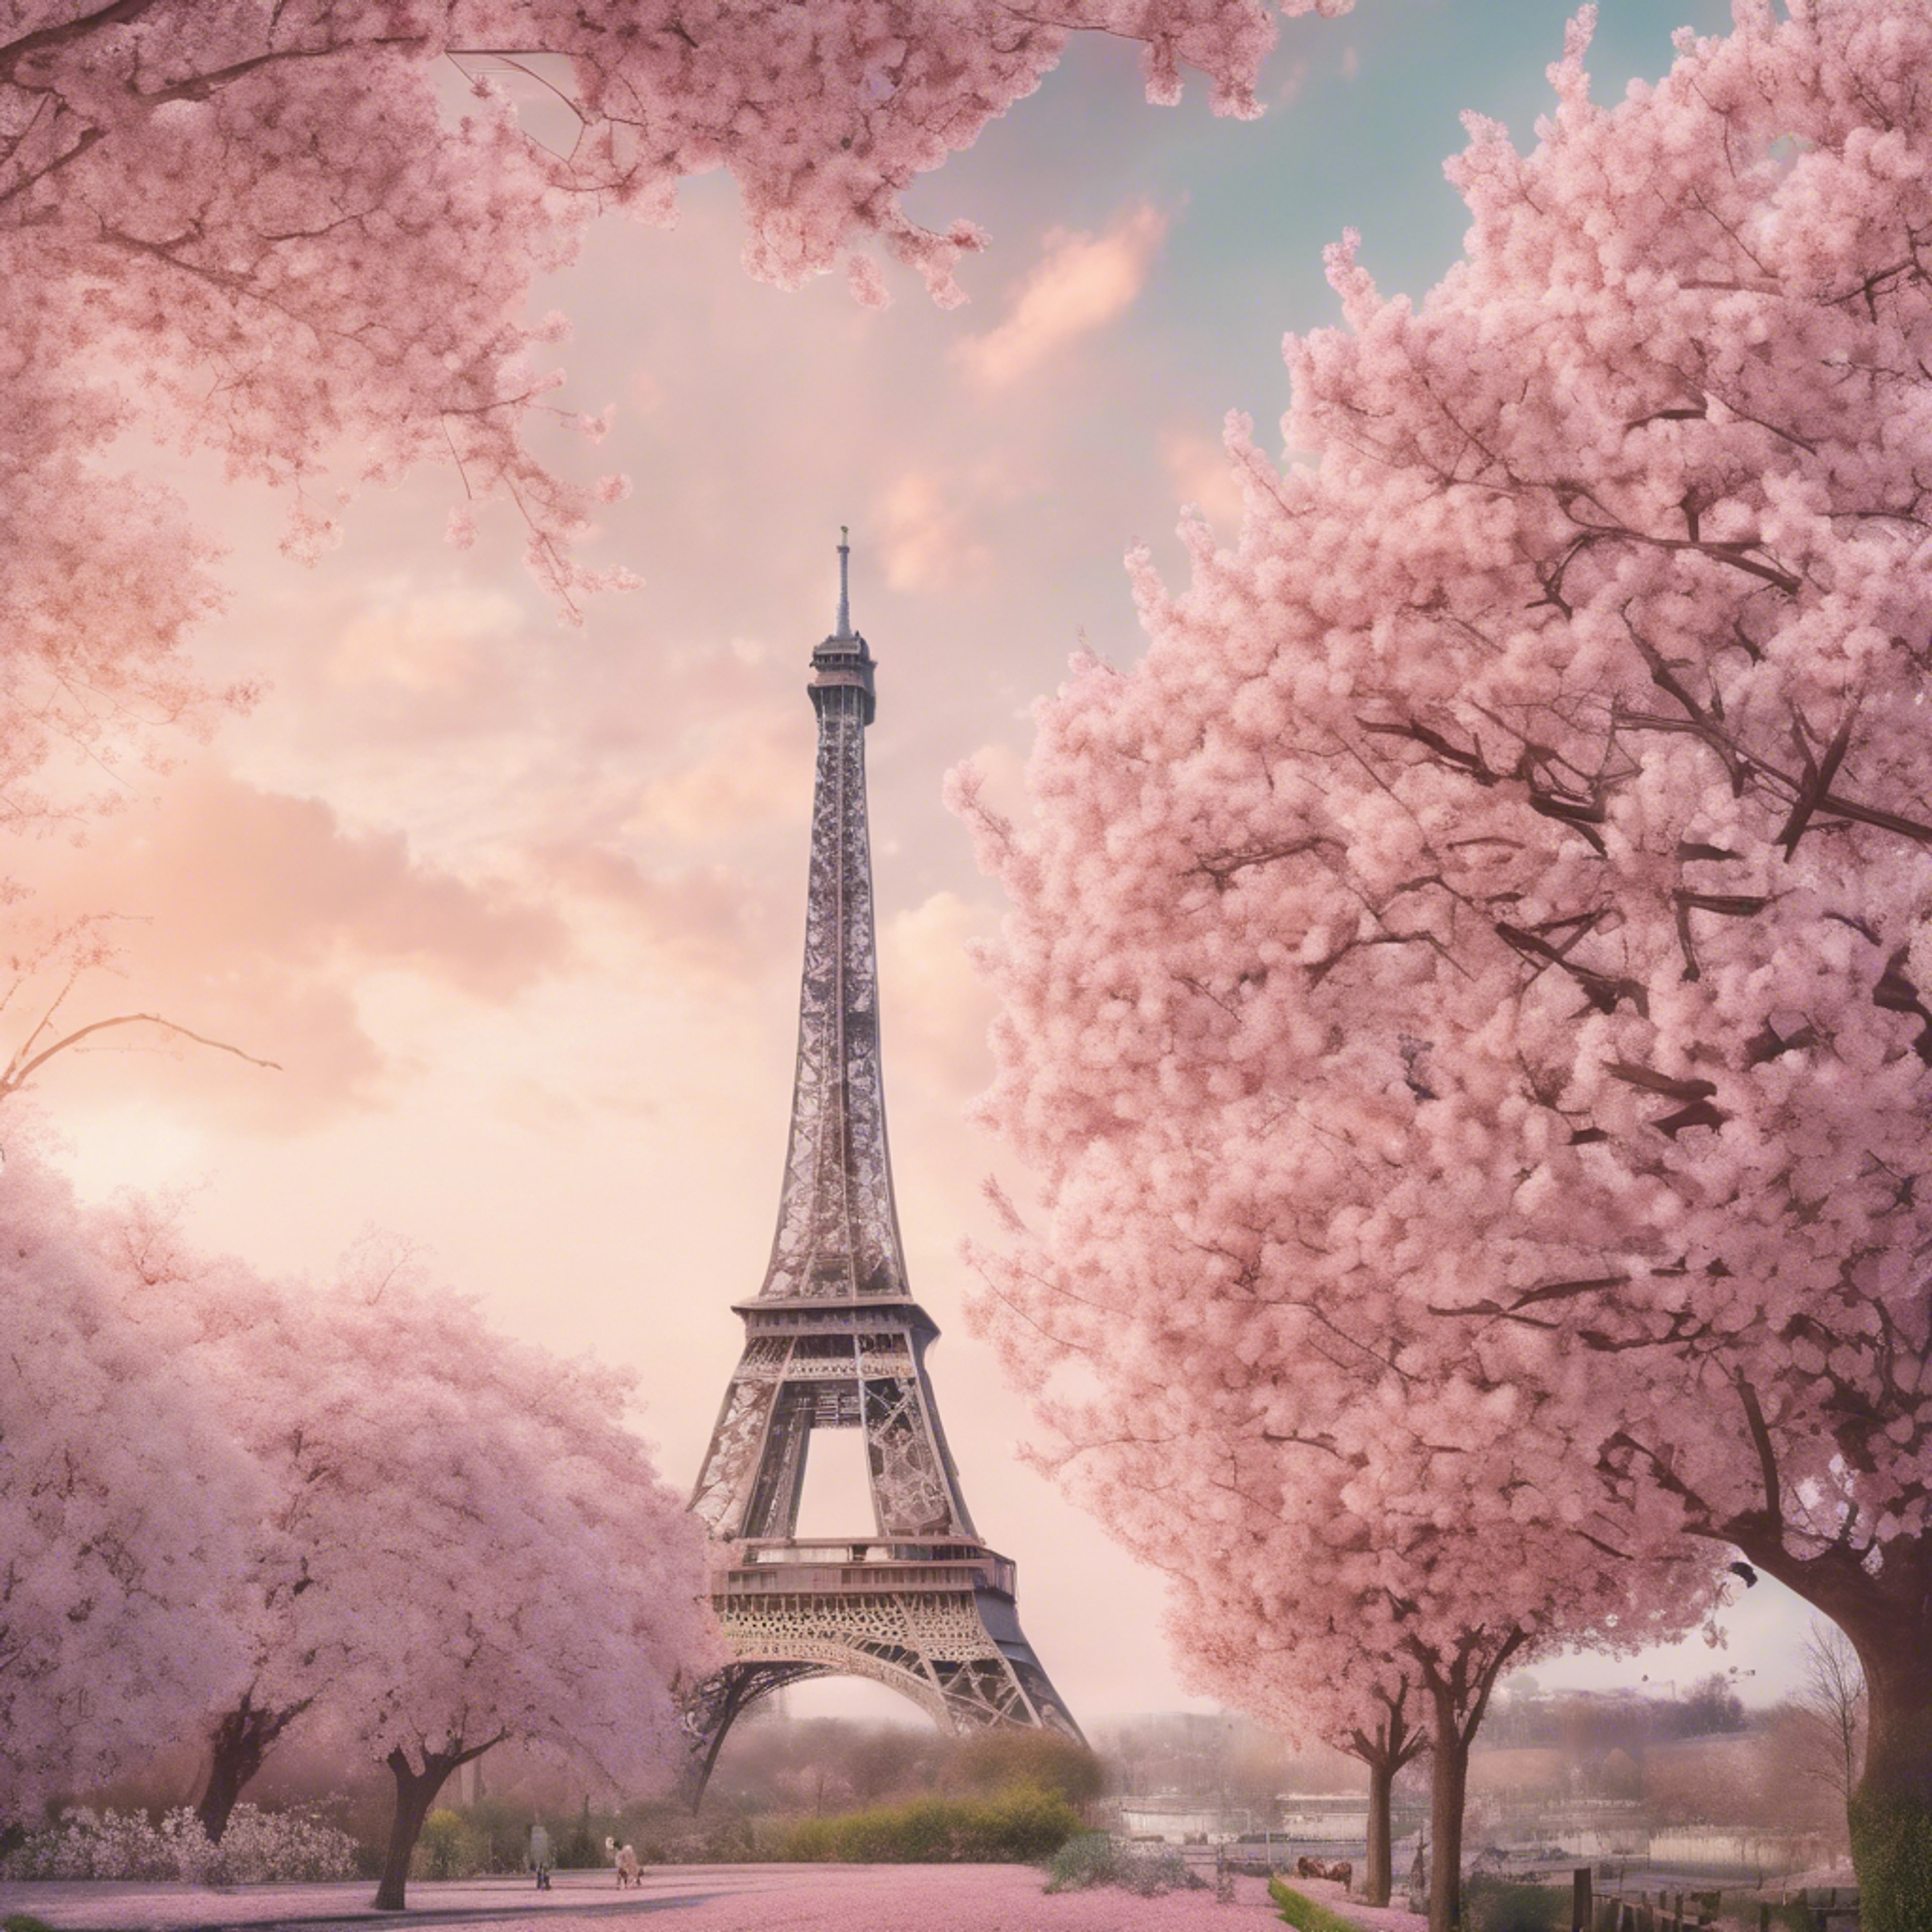 A dreamy pastel artwork of the Eiffel Tower enveloped in cherry blossoms during spring. Tapéta[34c320f998cf44e290fc]